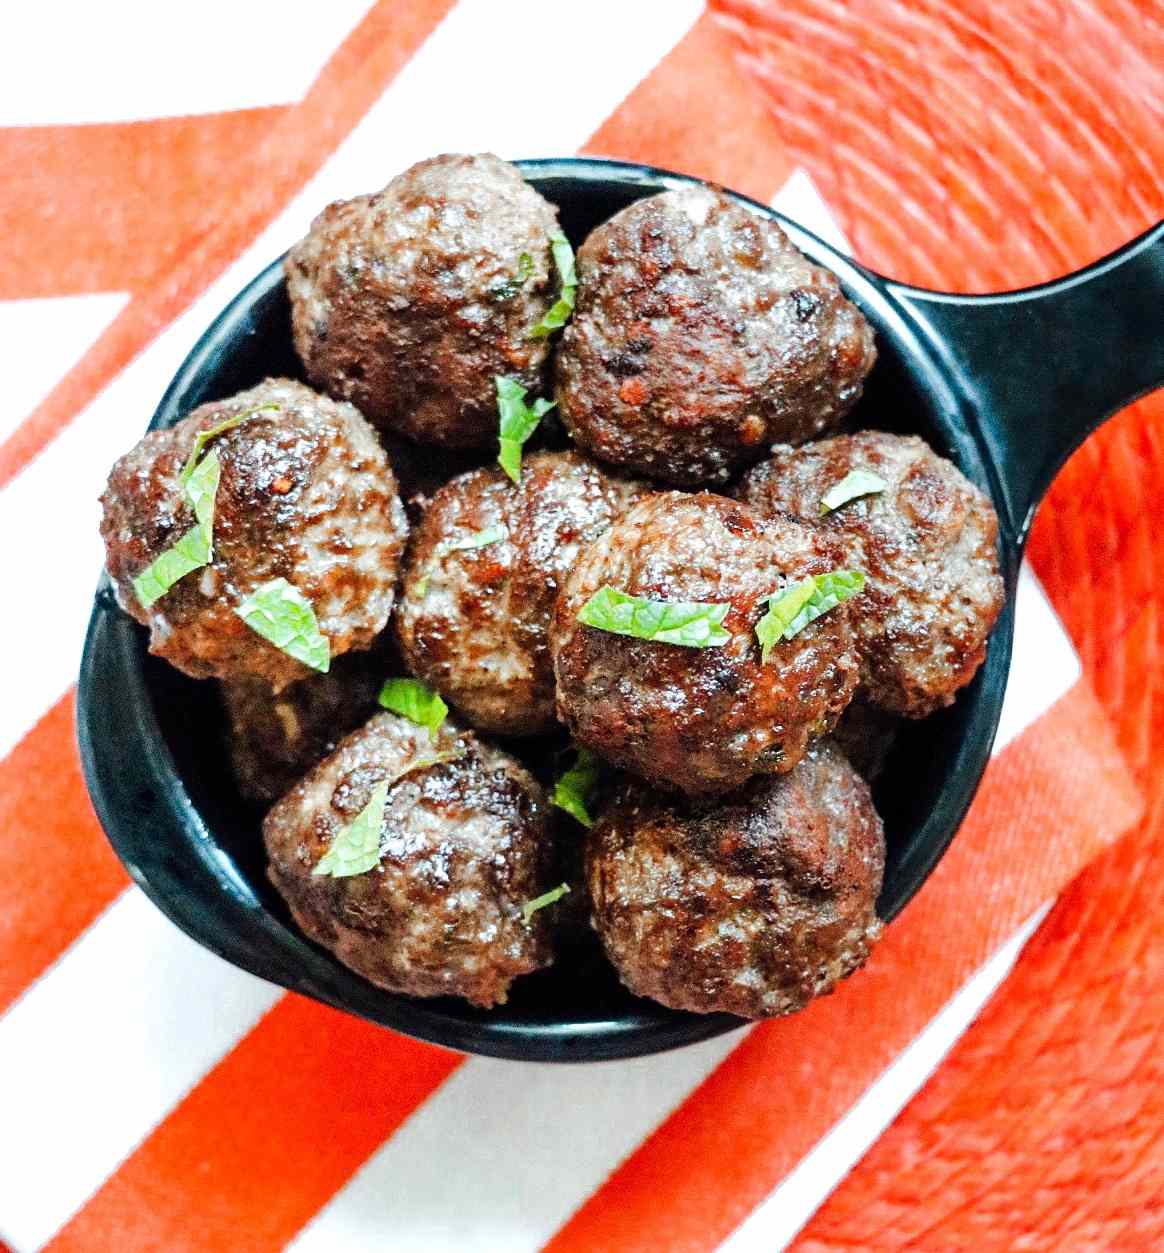 <p>These Turkish meatballs come together quickly because they are made using the food processor to crumble the bread and thoroughly mix all the ingredients. While the meatballs should be served soon after cooking, the mixture can be refrigerated for an hour before frying them. A garnish of fresh chopped mint or parsley makes an attractive presentation.</p>
                          